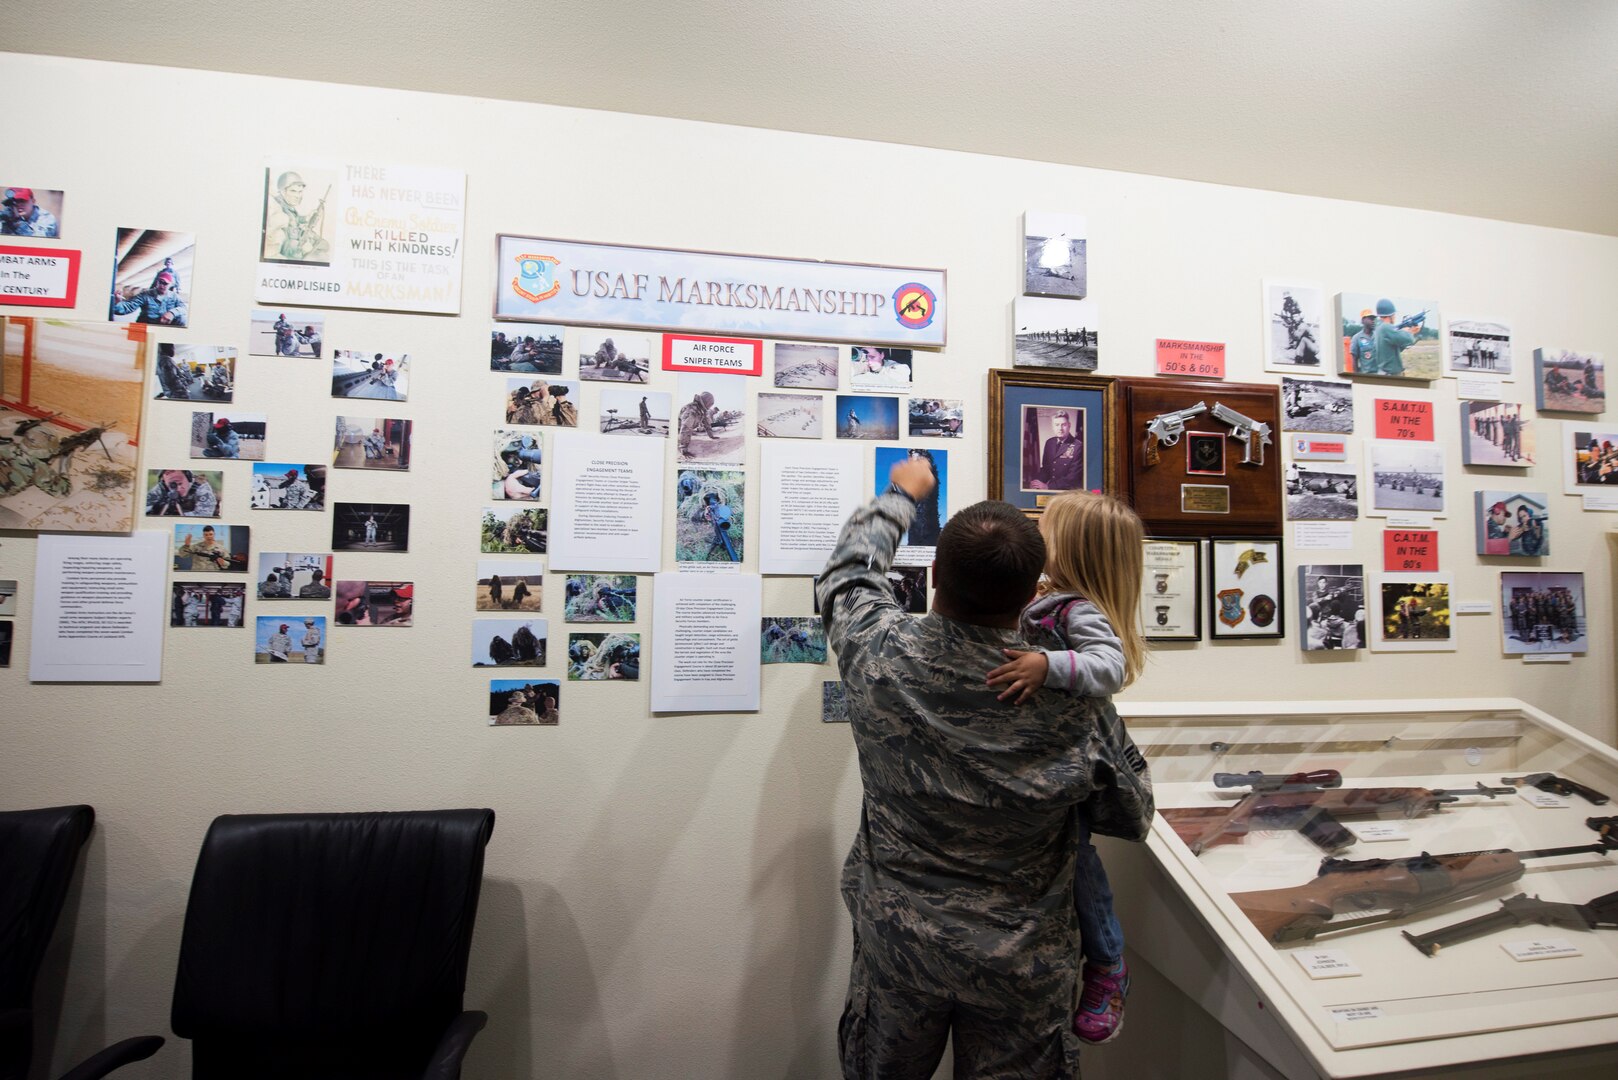 Air Force Master Sgt. Justin Bosh, 72nd Security Forces Squadron, Tinker Air Force Base, Okla., explains part of an exhibit to his daughter at the Security Forces Museum Foundation at Joint Base San Antonio-Lackland, Texas, Oct. 19, 2018. The artifacts on display have come from multiple sources to include former Airmen and other museums that have closed, as well as the National Museum of the U.S. Air Force at Wright-Patterson Air Force Base, Ohio.